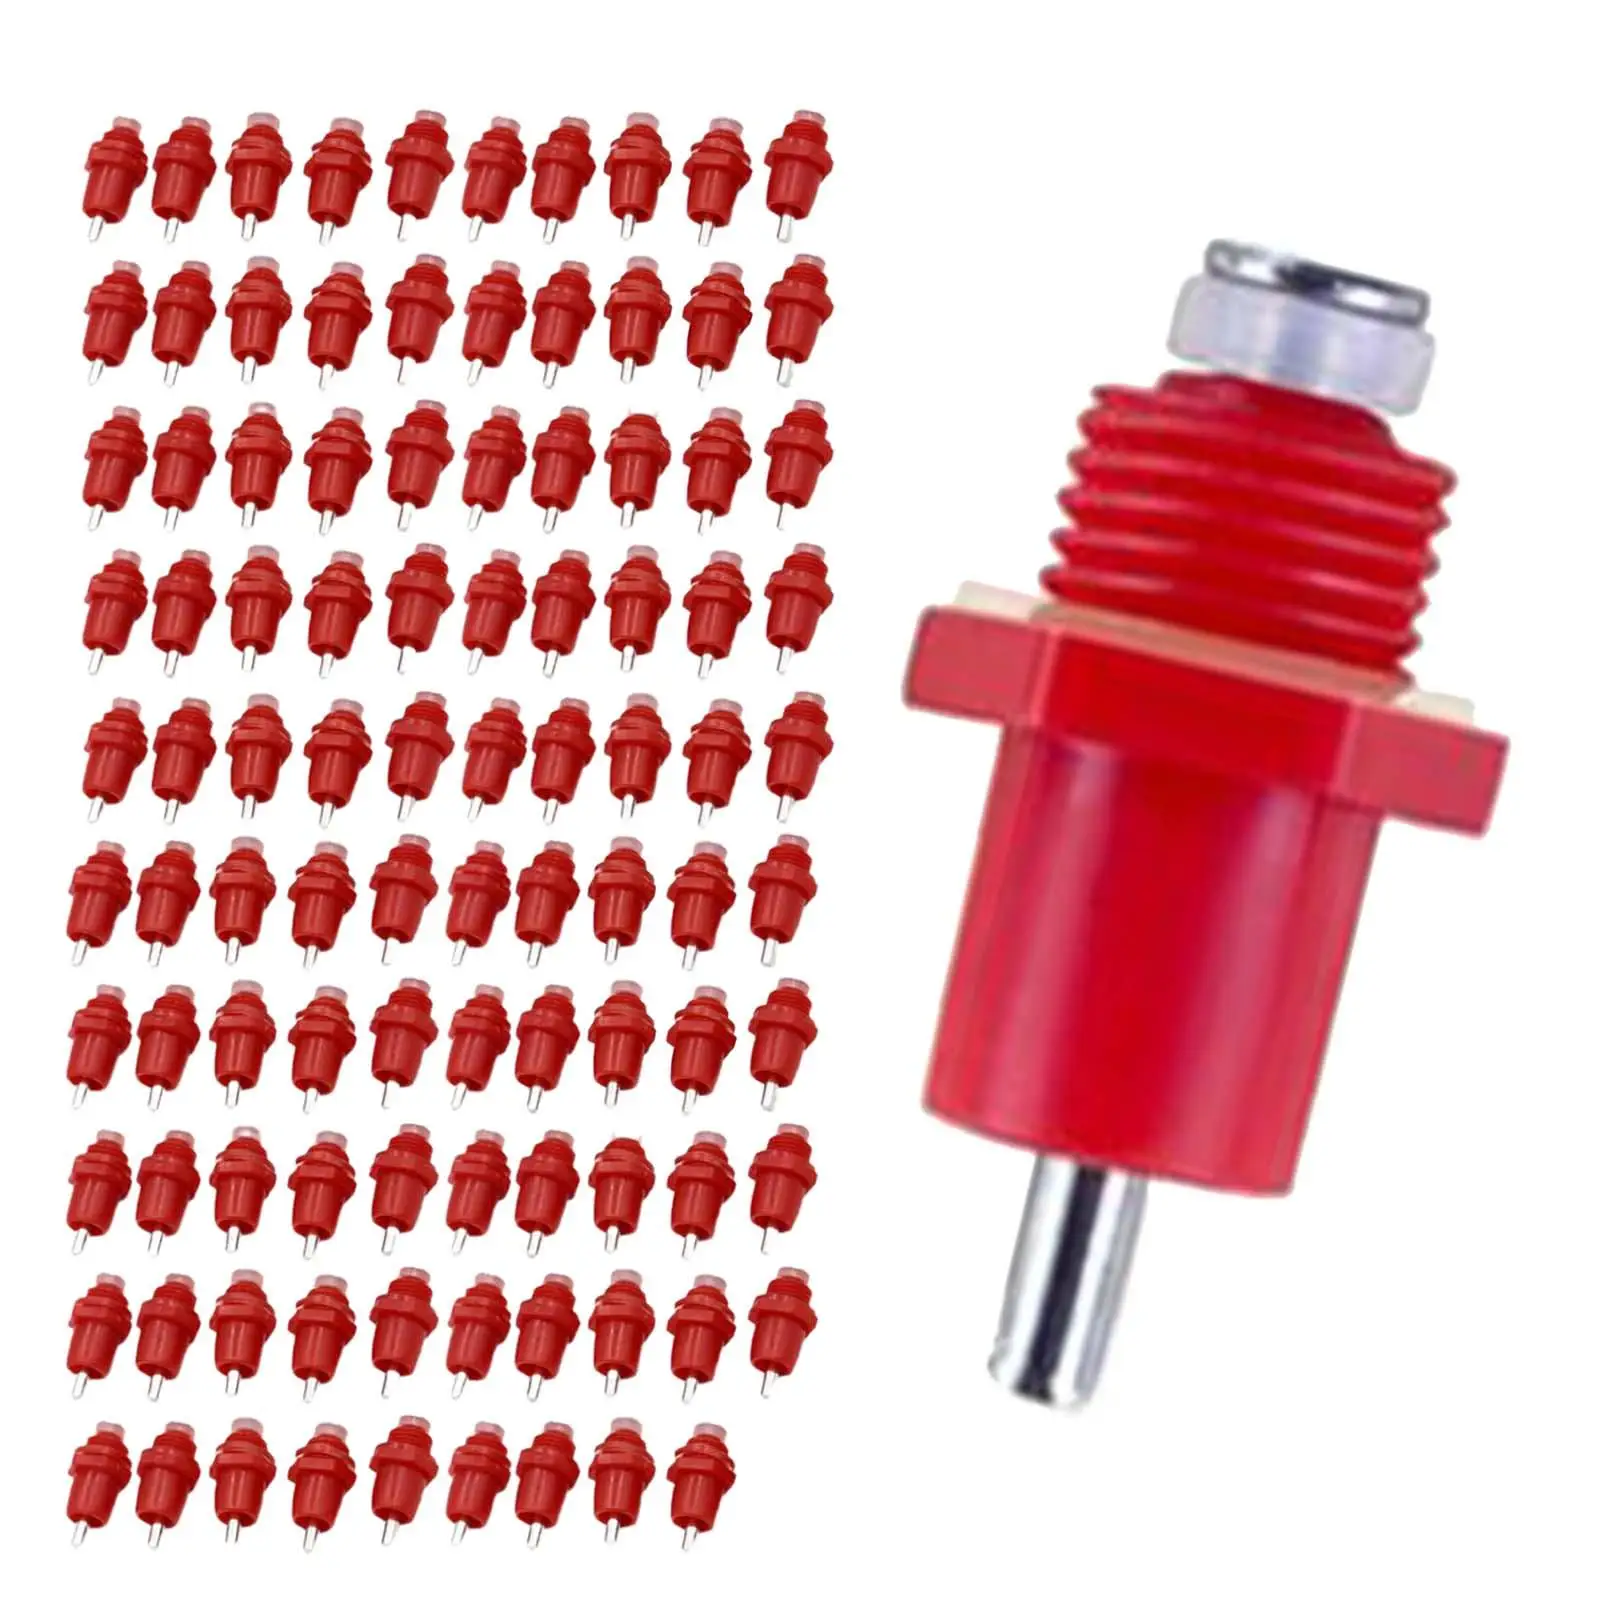 100 Pieces Automatic Poultry Water Nipple Drinker Screw in Type Sturdy Convenient Installation Feeder Cage Accessories Waterer